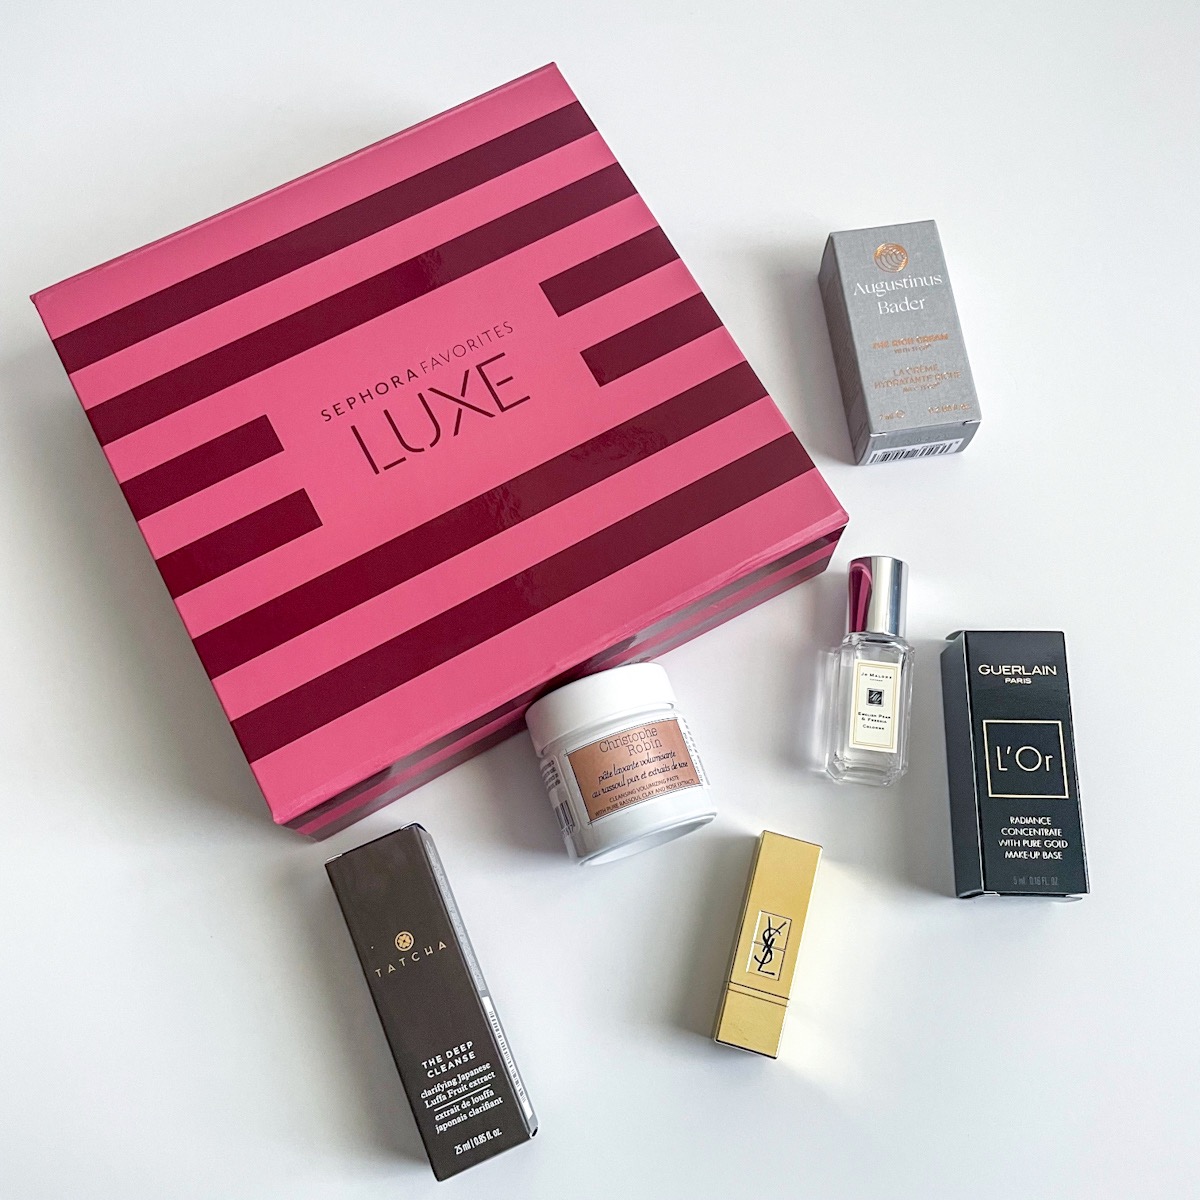 Sephora Favorites: LUXE – The Elevated Essentials Review